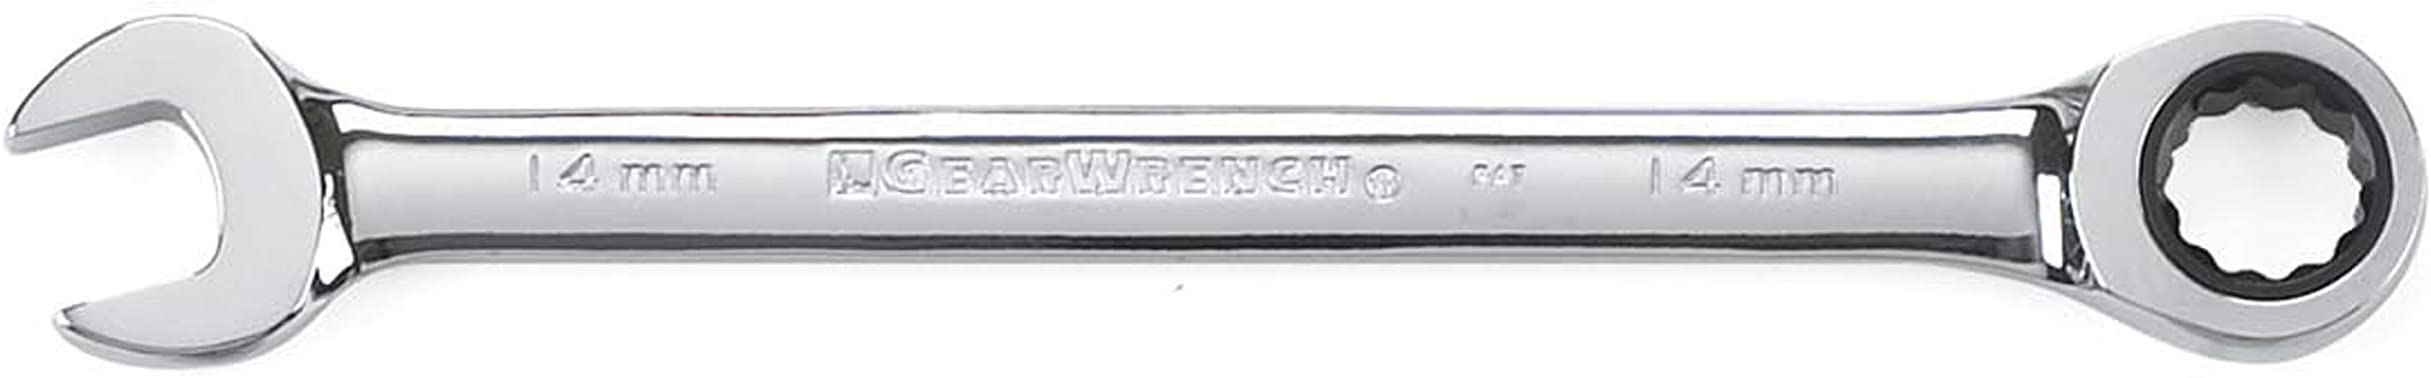 GEARWRENCH 14mm 12 Point Ratcheting Combination Wrench - 9114D